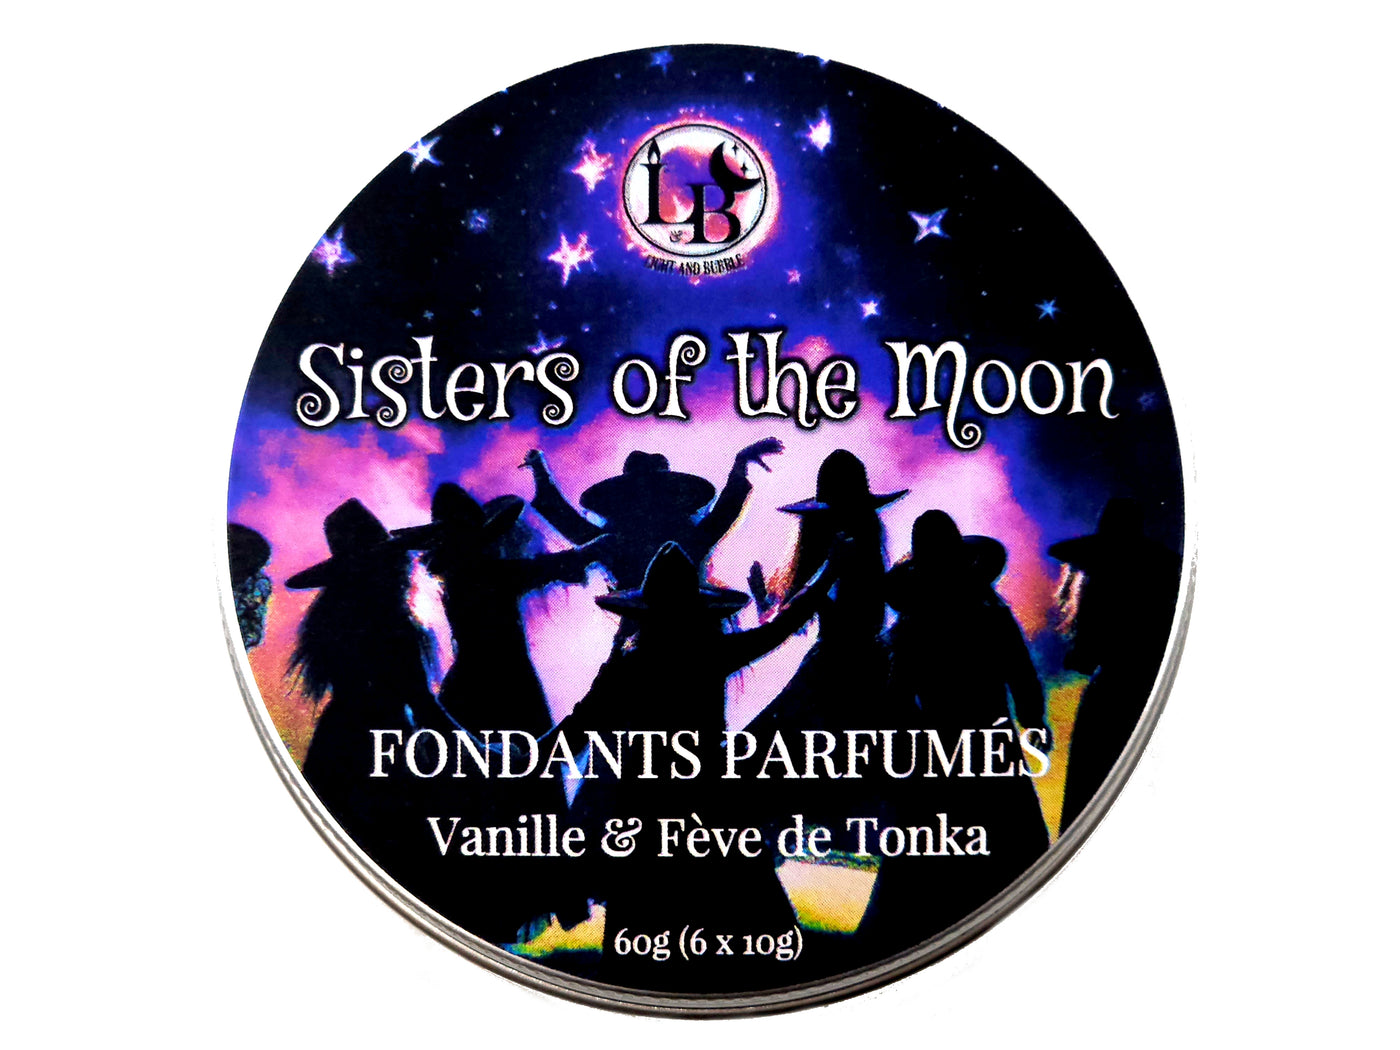 SISTERS OF THE MOON - scented fondants